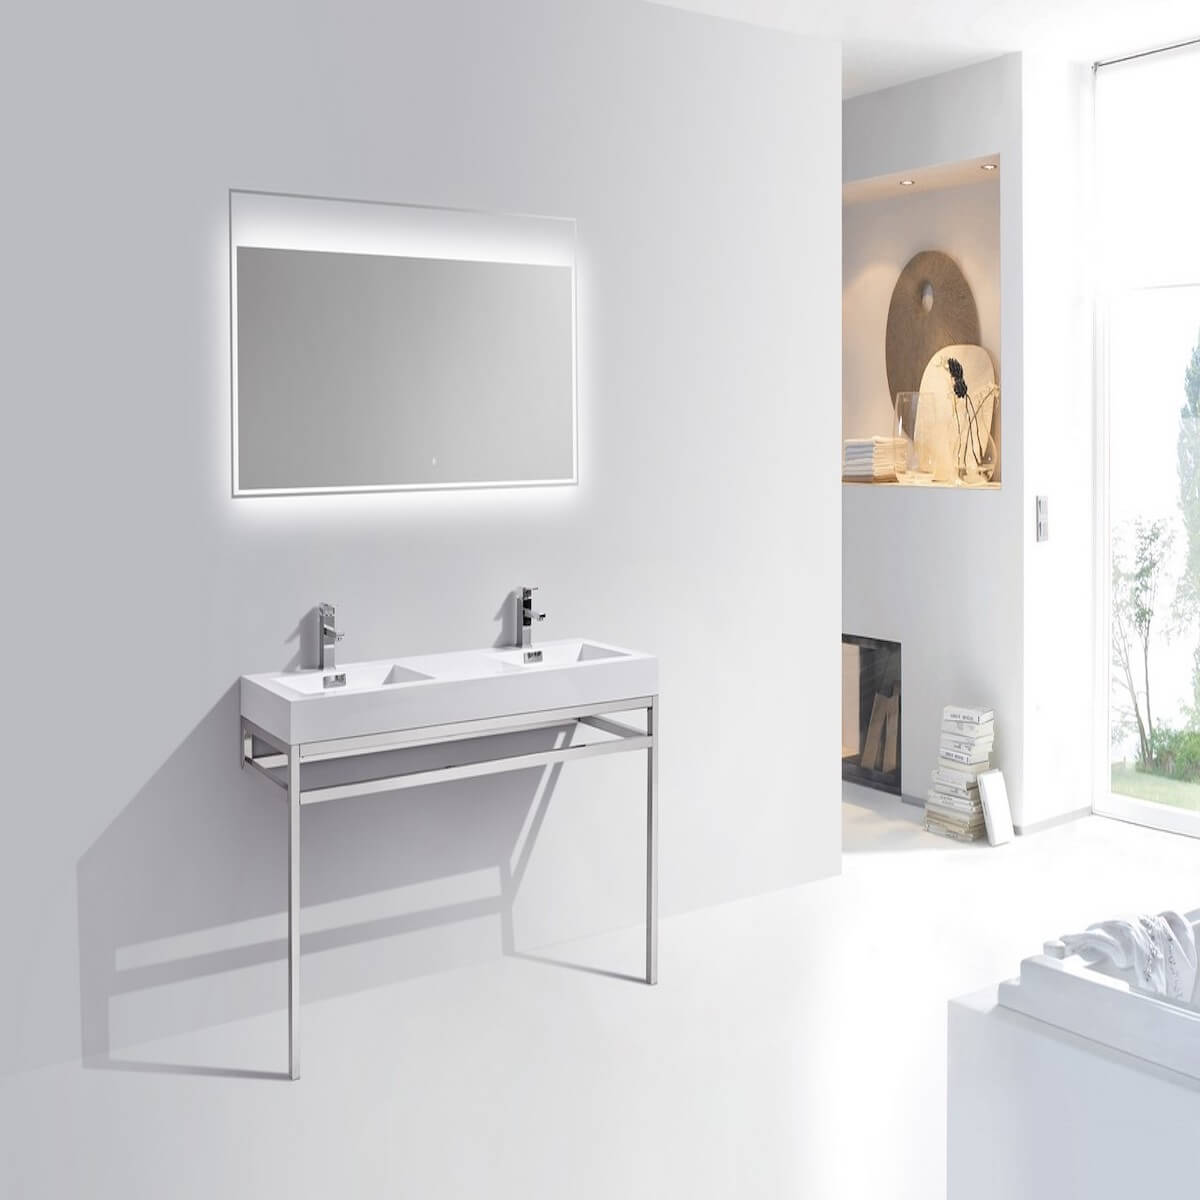 KubeBath Haus 60” Double Sink Stainless Steel Console with While Acrylic Sink CH60D in Bathroom